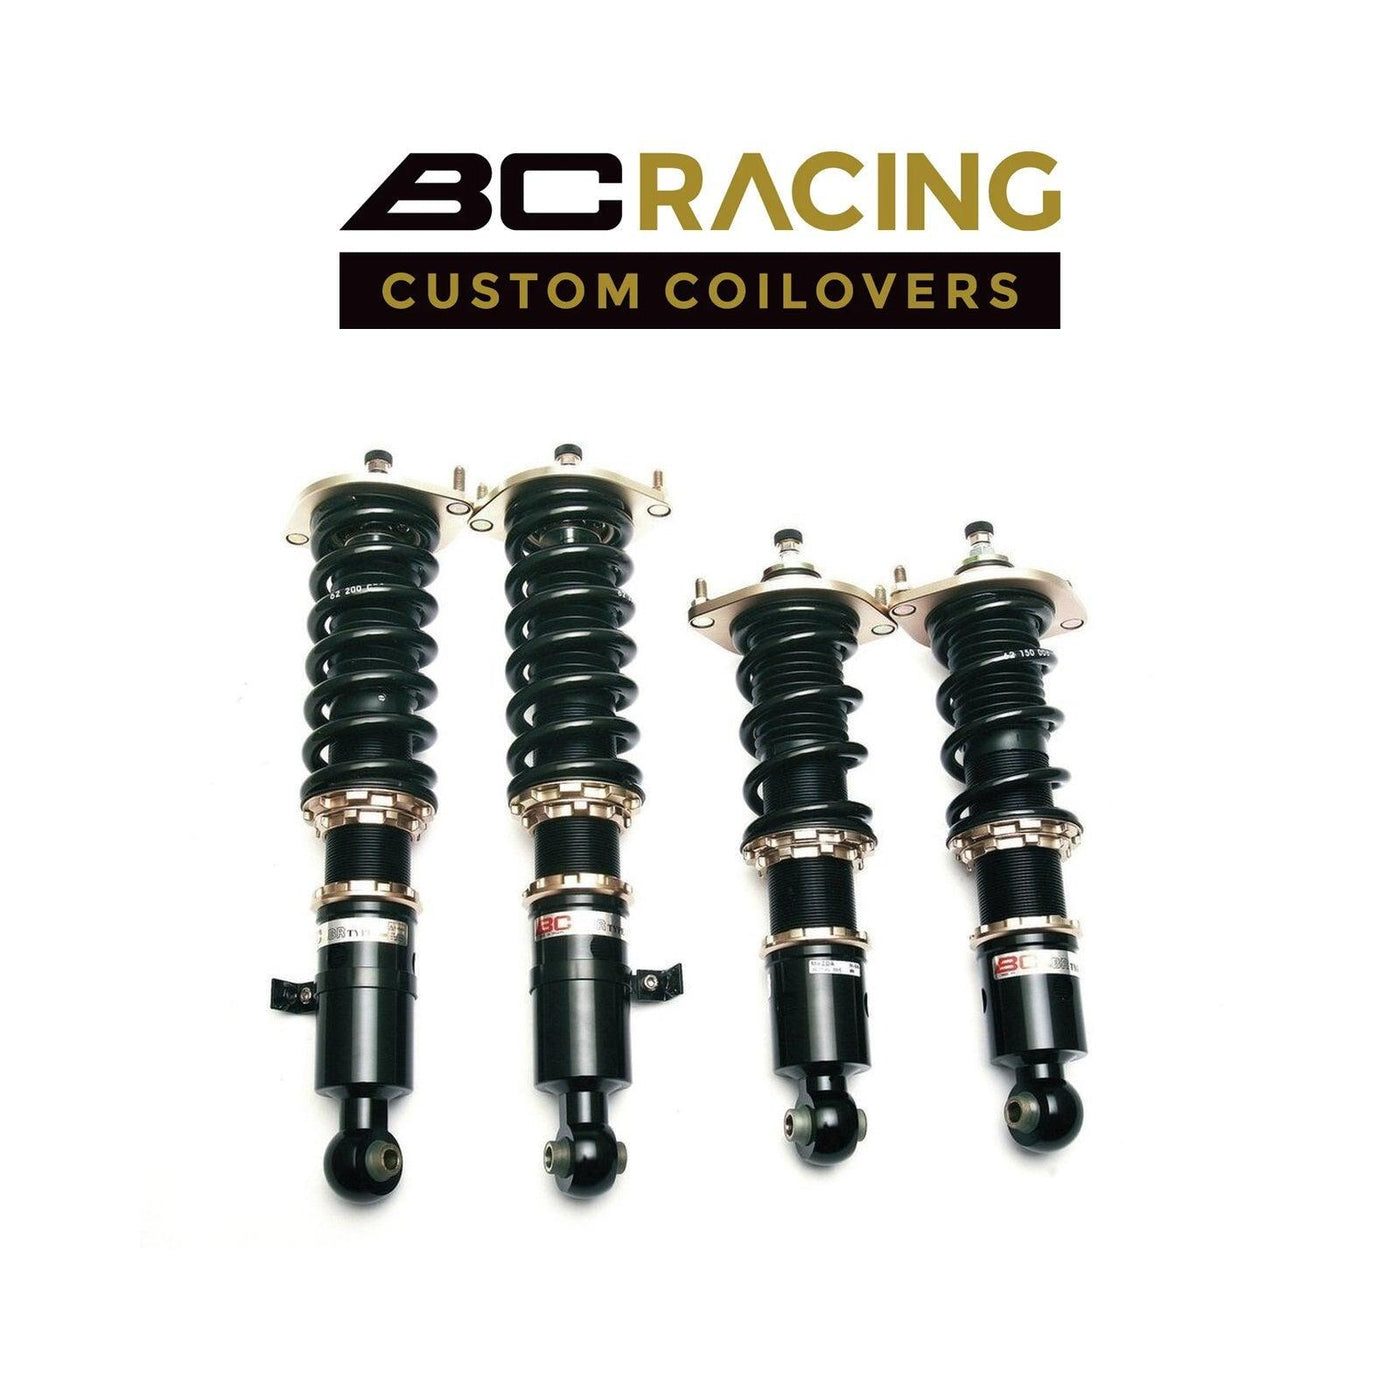 BC Racing Coilovers 2000-2006 TOYOTA Celica Superstrut NEVER SOLD IN USA - Attacking the Clock Racing